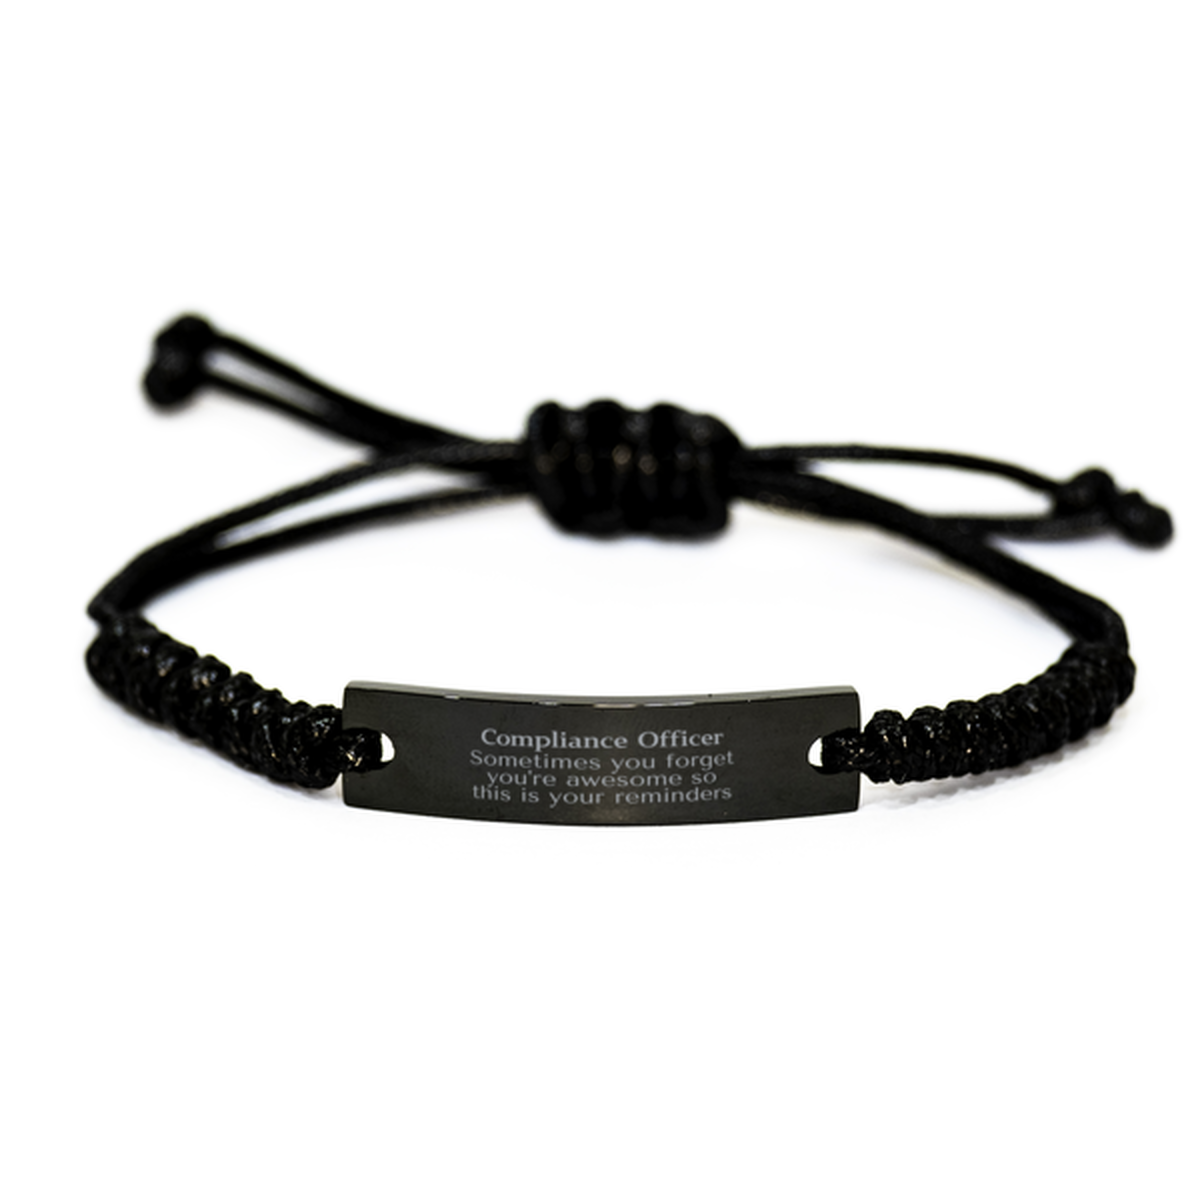 Sentimental Compliance Officer Black Rope Bracelet, Compliance Officer Sometimes you forget you're awesome so this is your reminders, Graduation Christmas Birthday Gifts for Compliance Officer, Men, Women, Coworkers